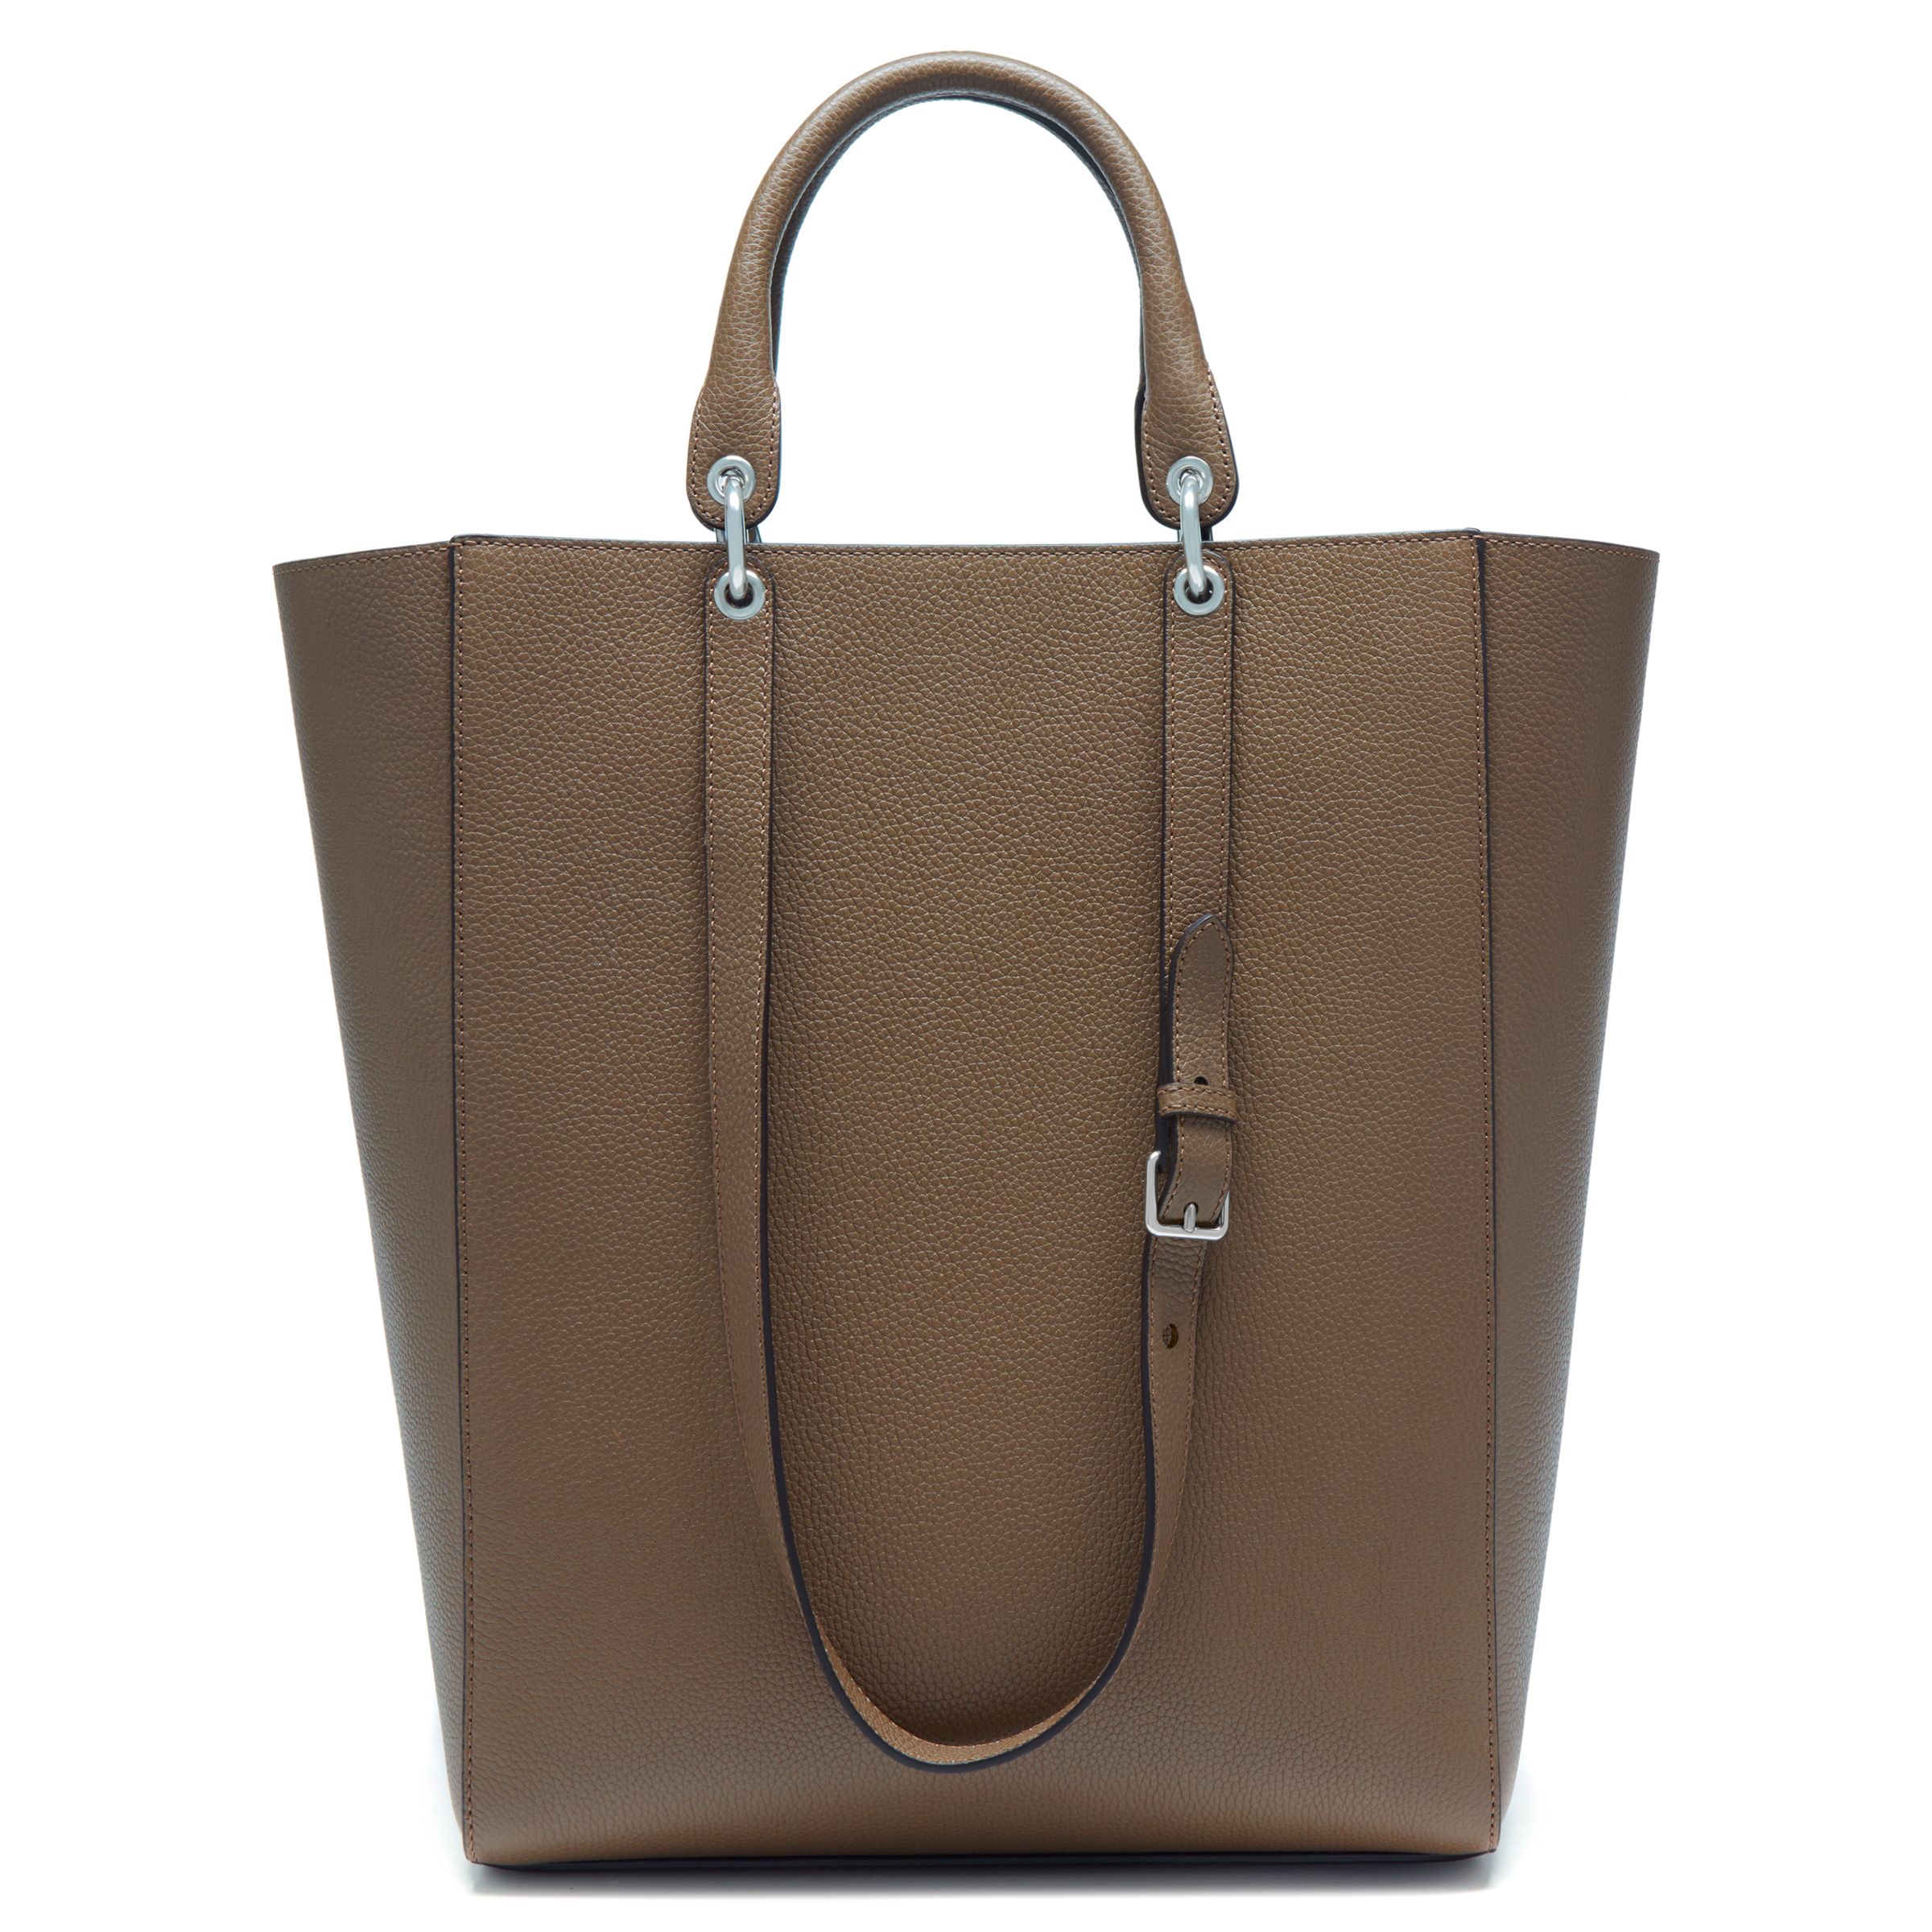 Mulberry Maple Small Classic Grain Leather Tote Bag at John Lewis ...